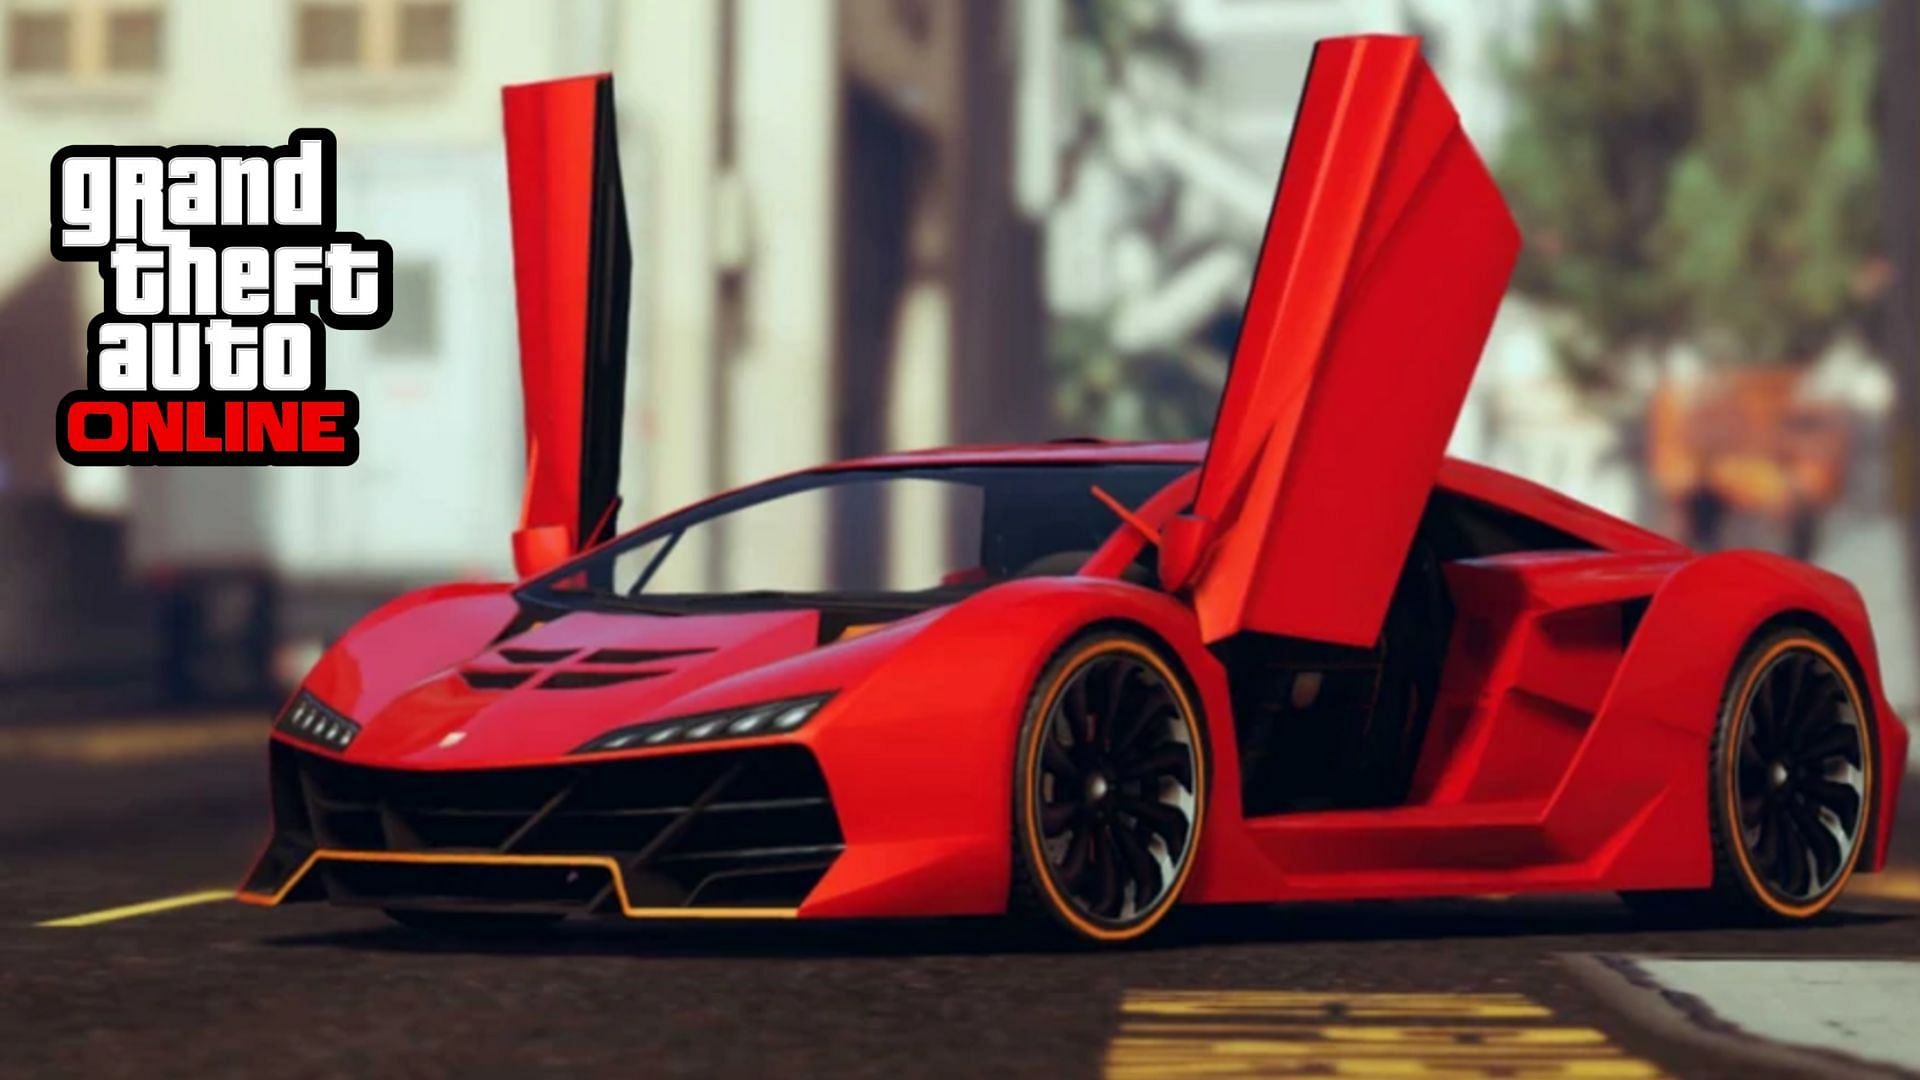 5 reasons to own Pegassi Zentorno in GTA Online in 2023